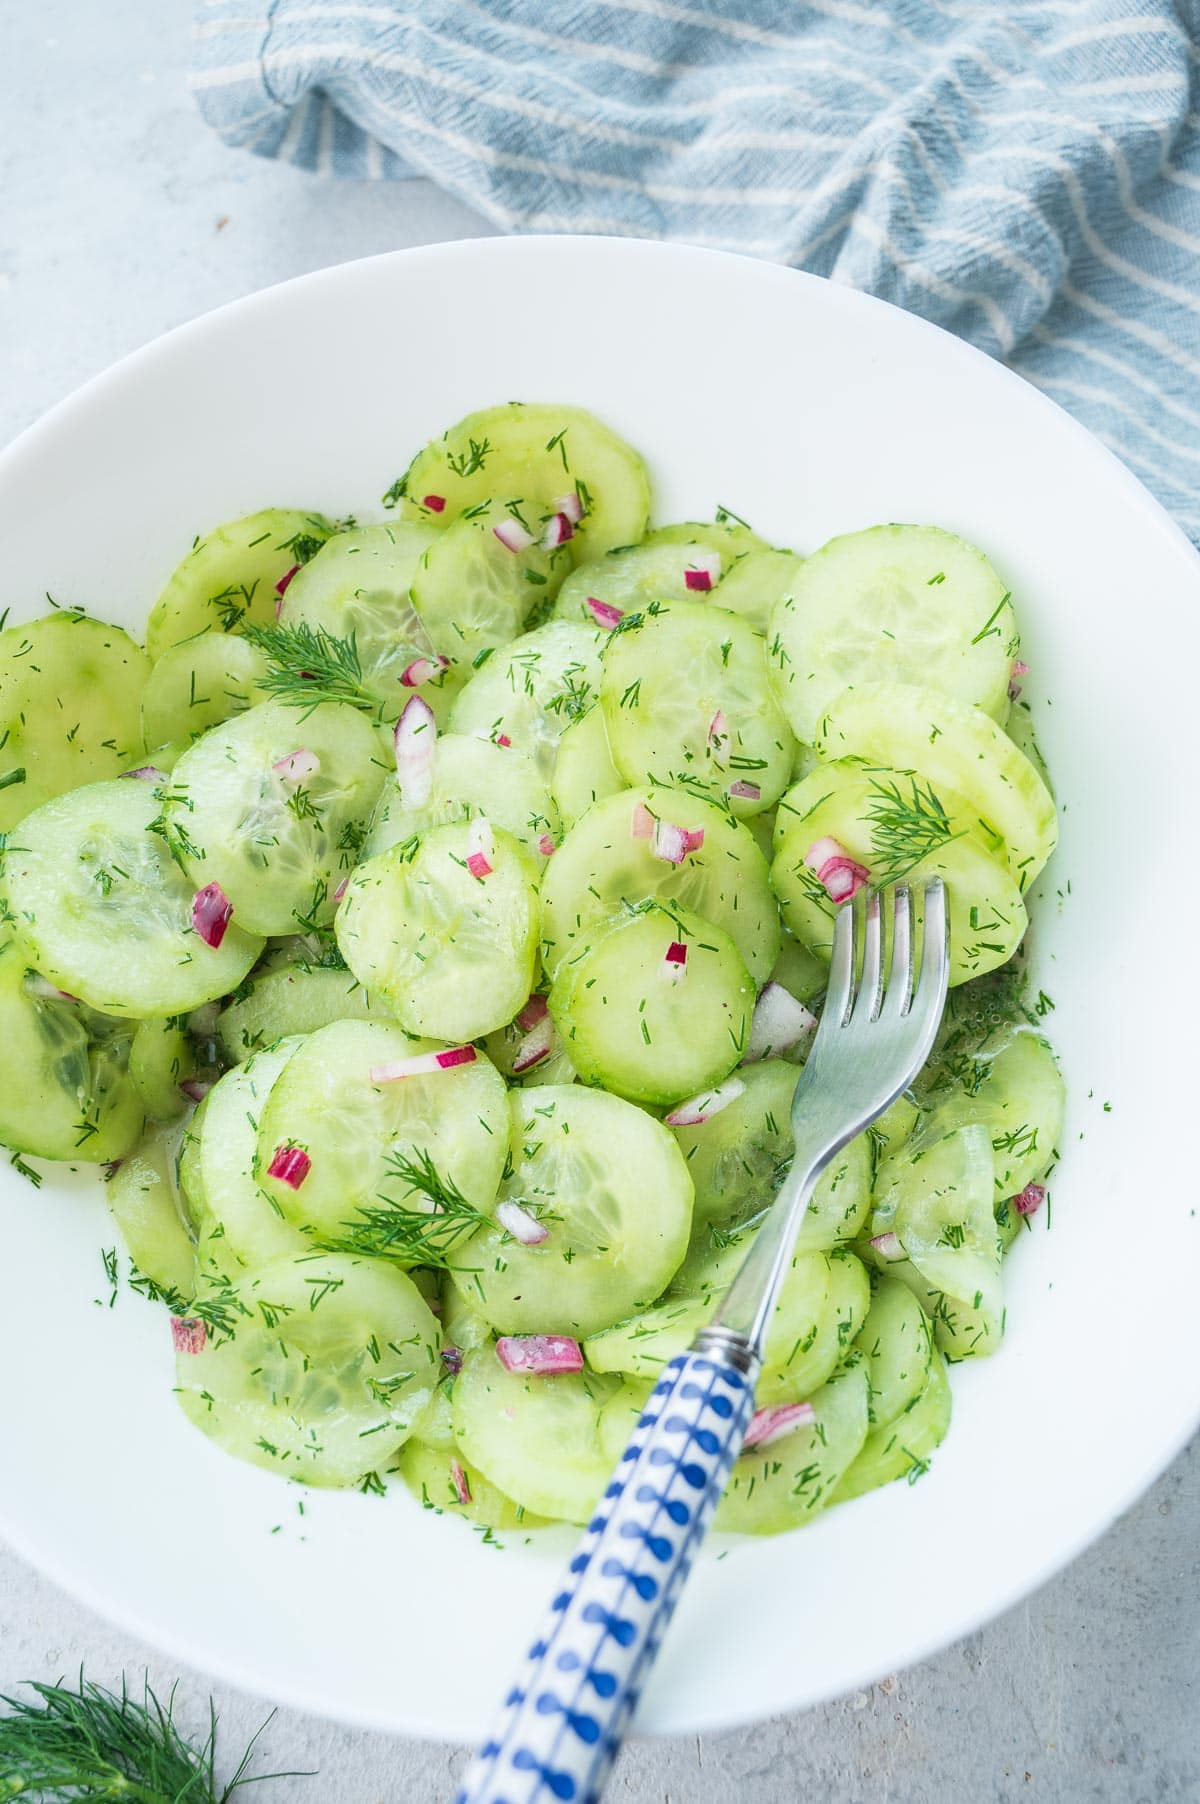 German cucumber salad in a white plate with a blue fork on the side.